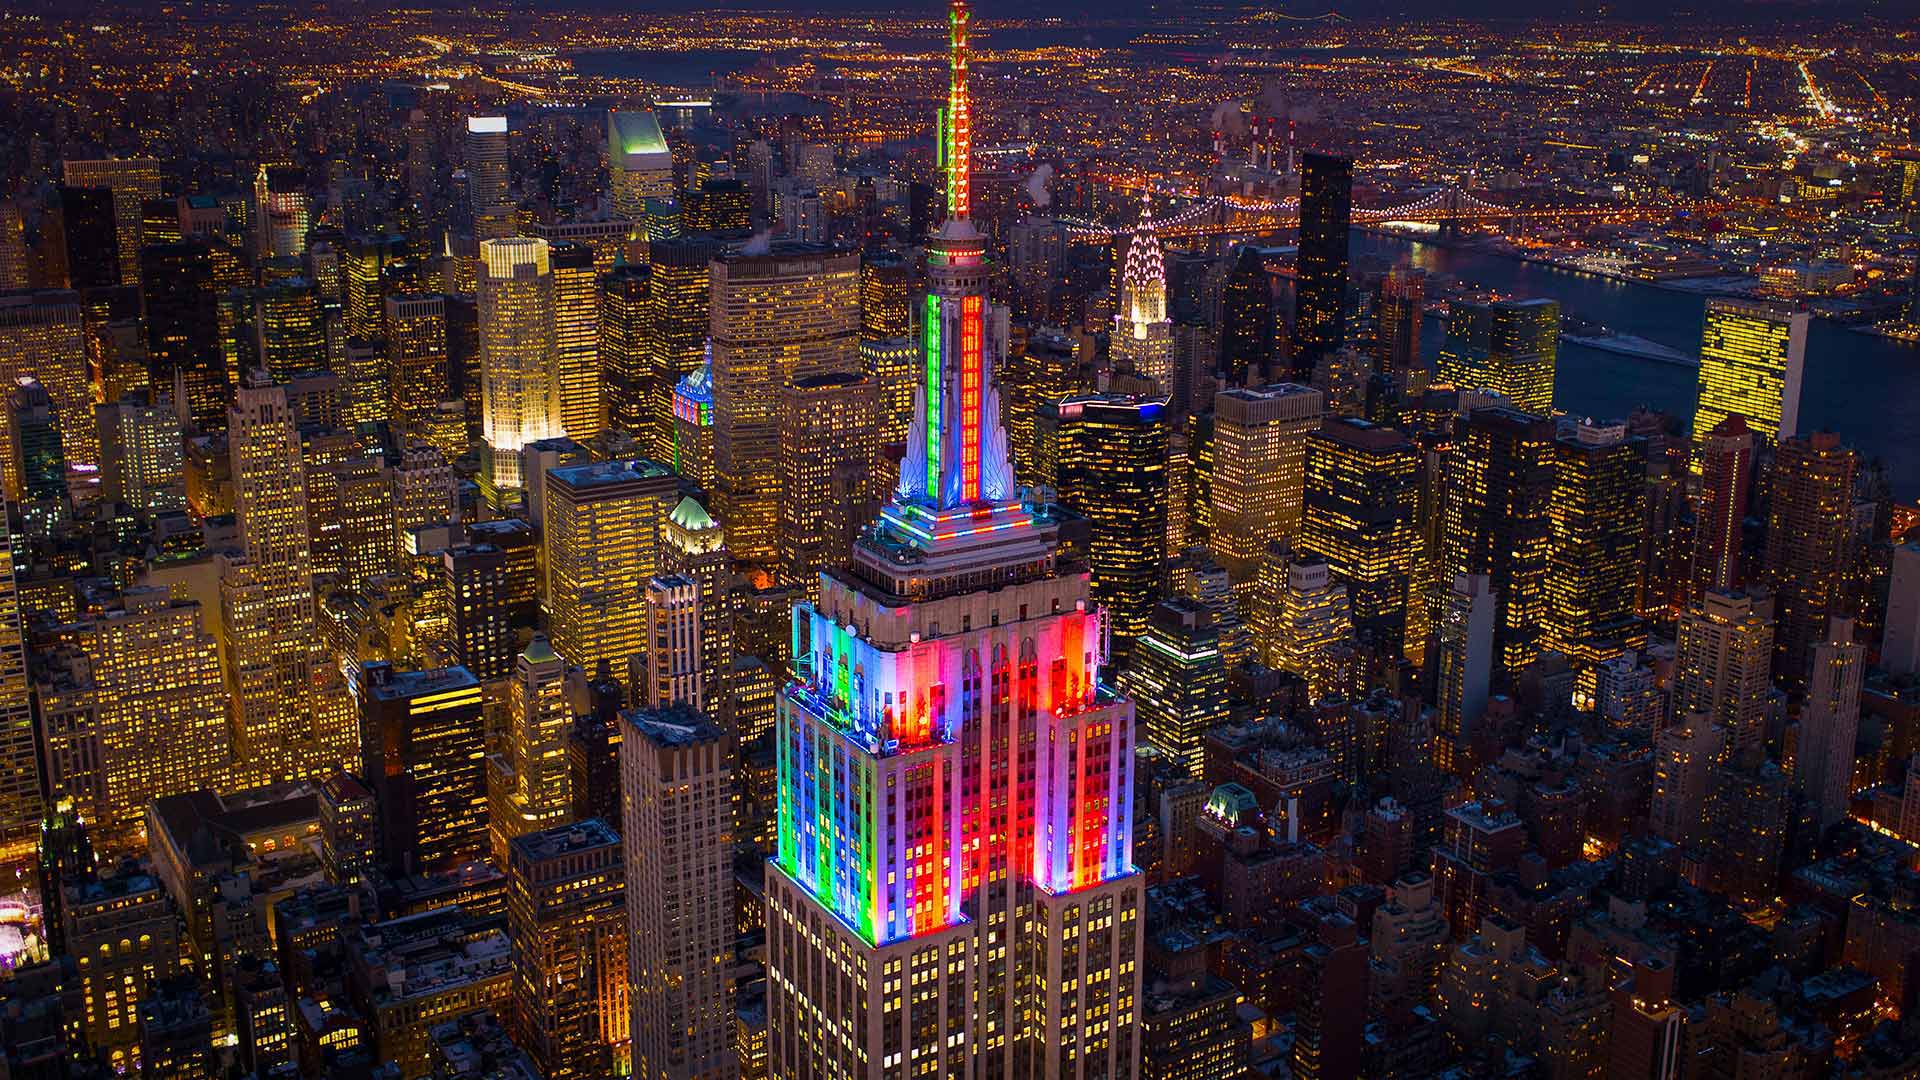 The Empire State Building lit up in honor of Pride Week in 2014, New York City - C. Taylor Crothers/Offset by Shutterstock)